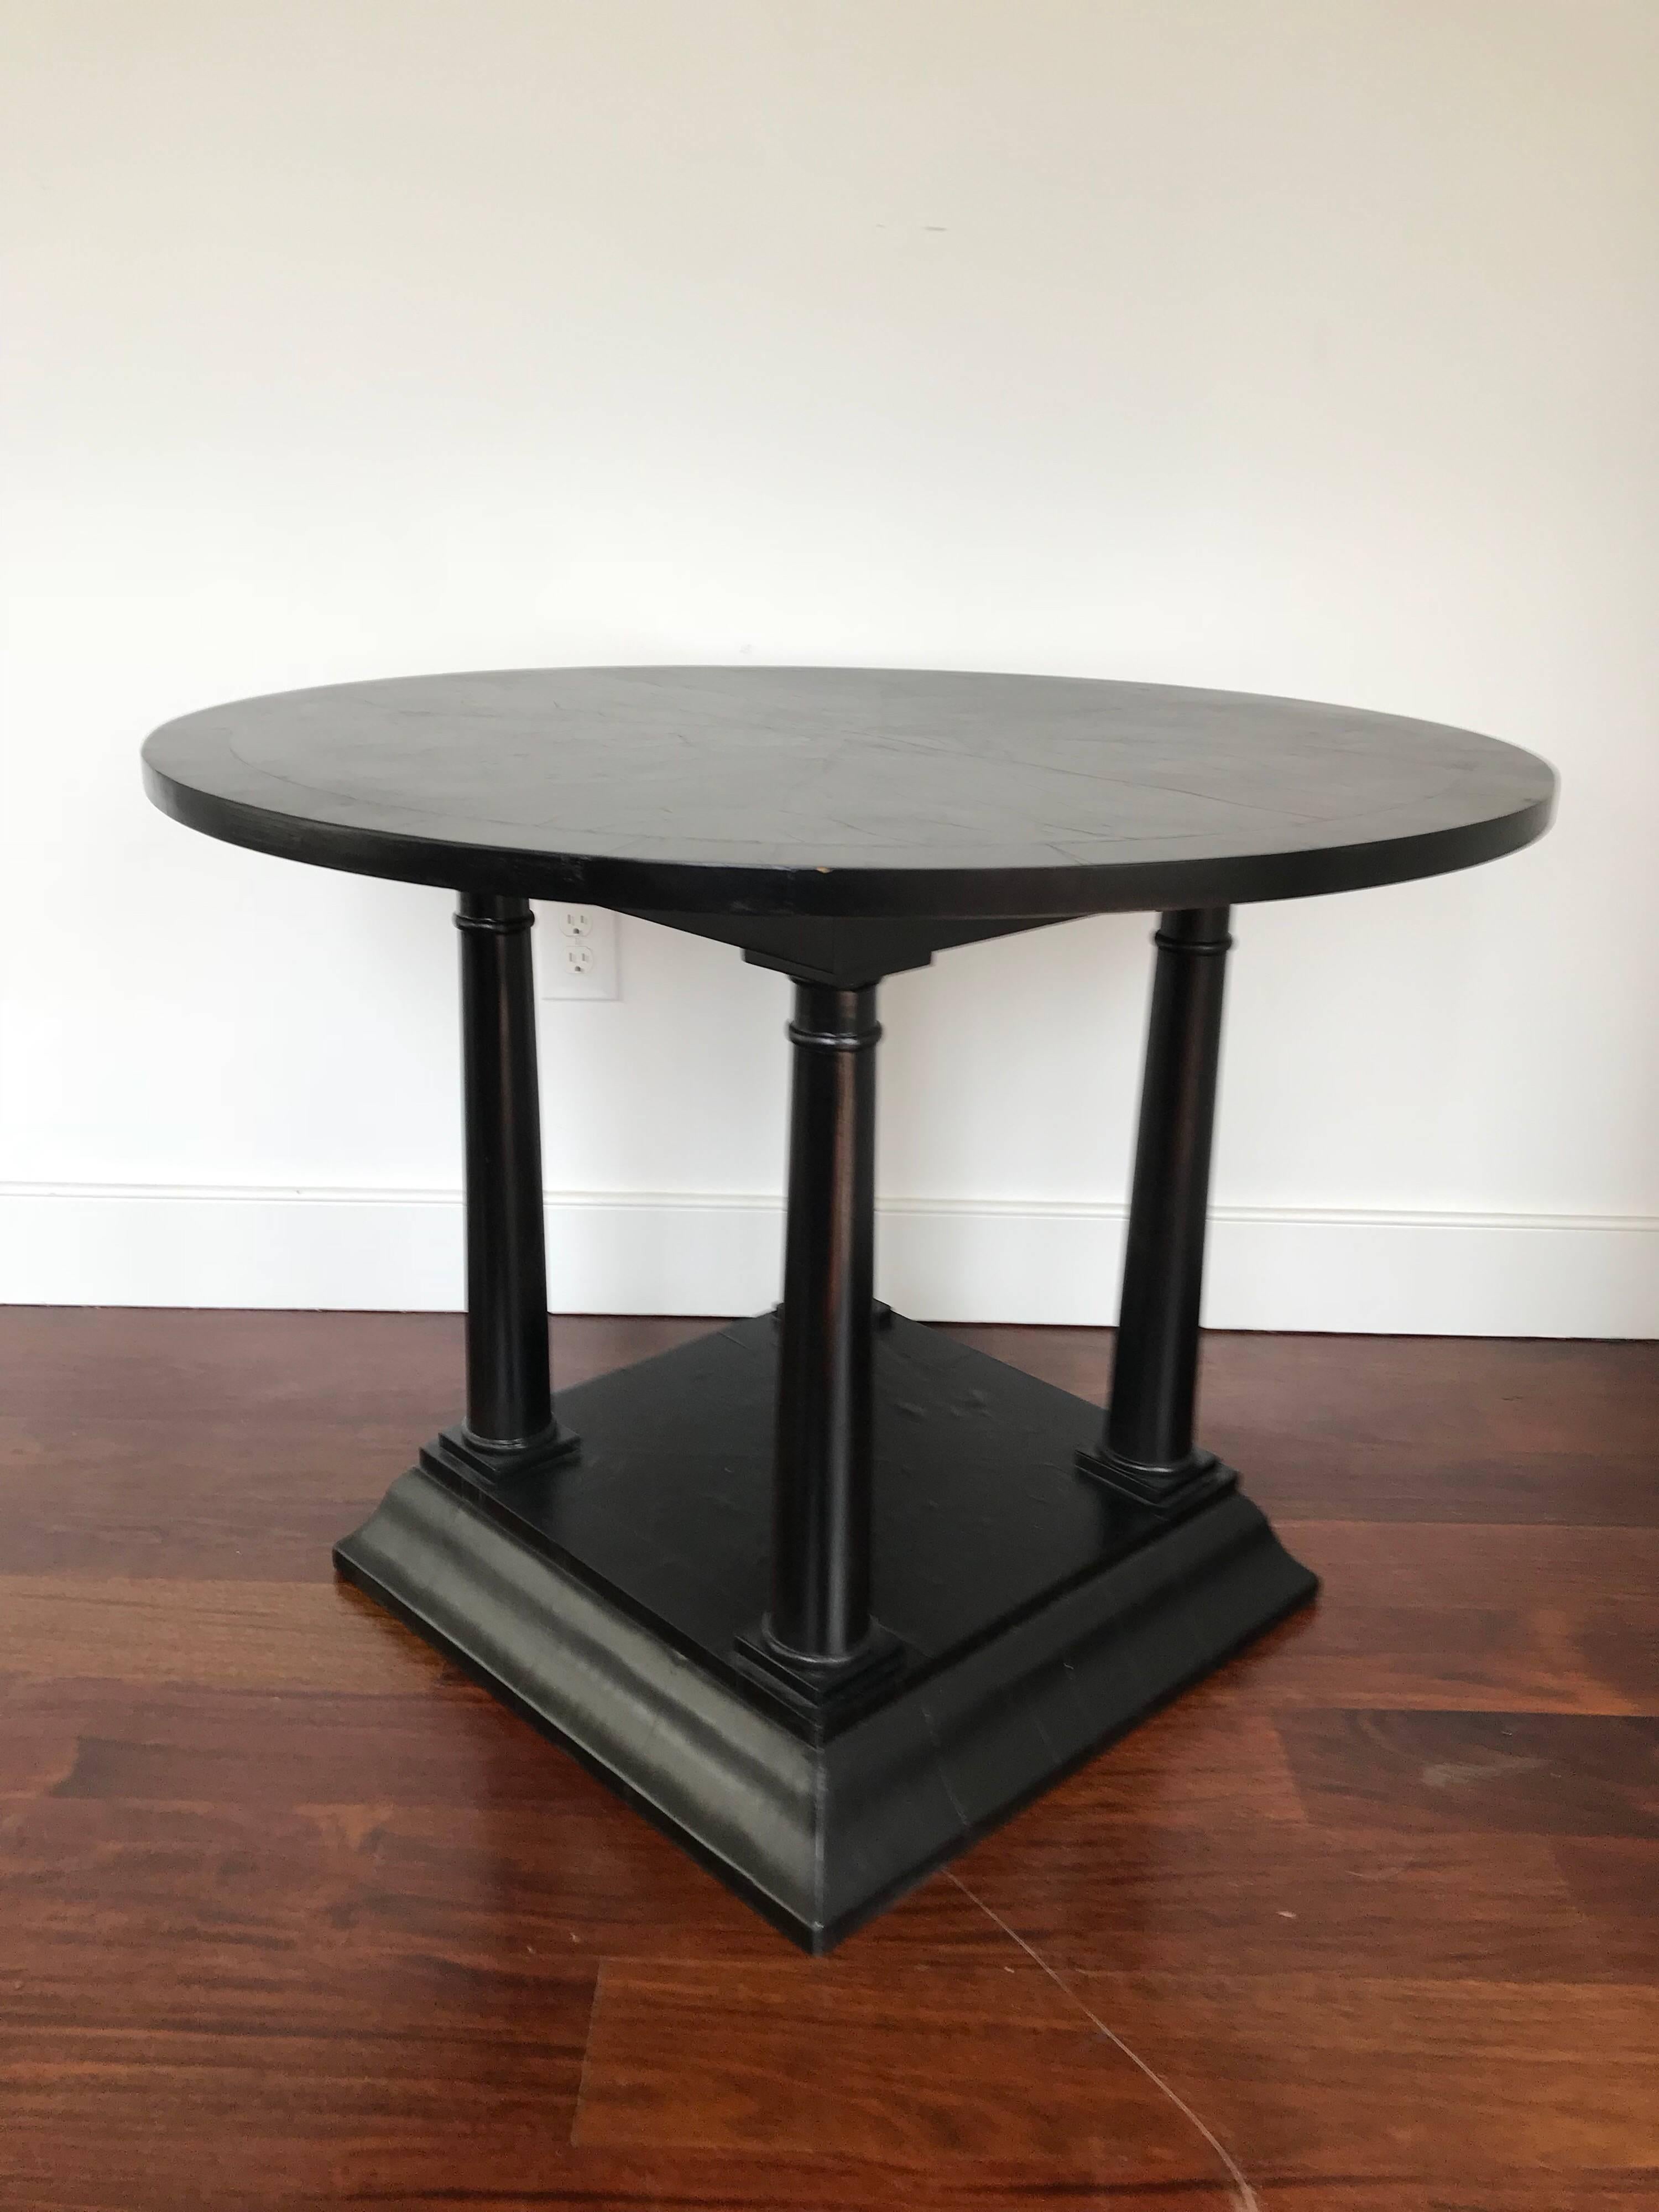 A handsome Regency style centre table with ebonized finish. Lower pediment connected to circular top by four column shaped legs.